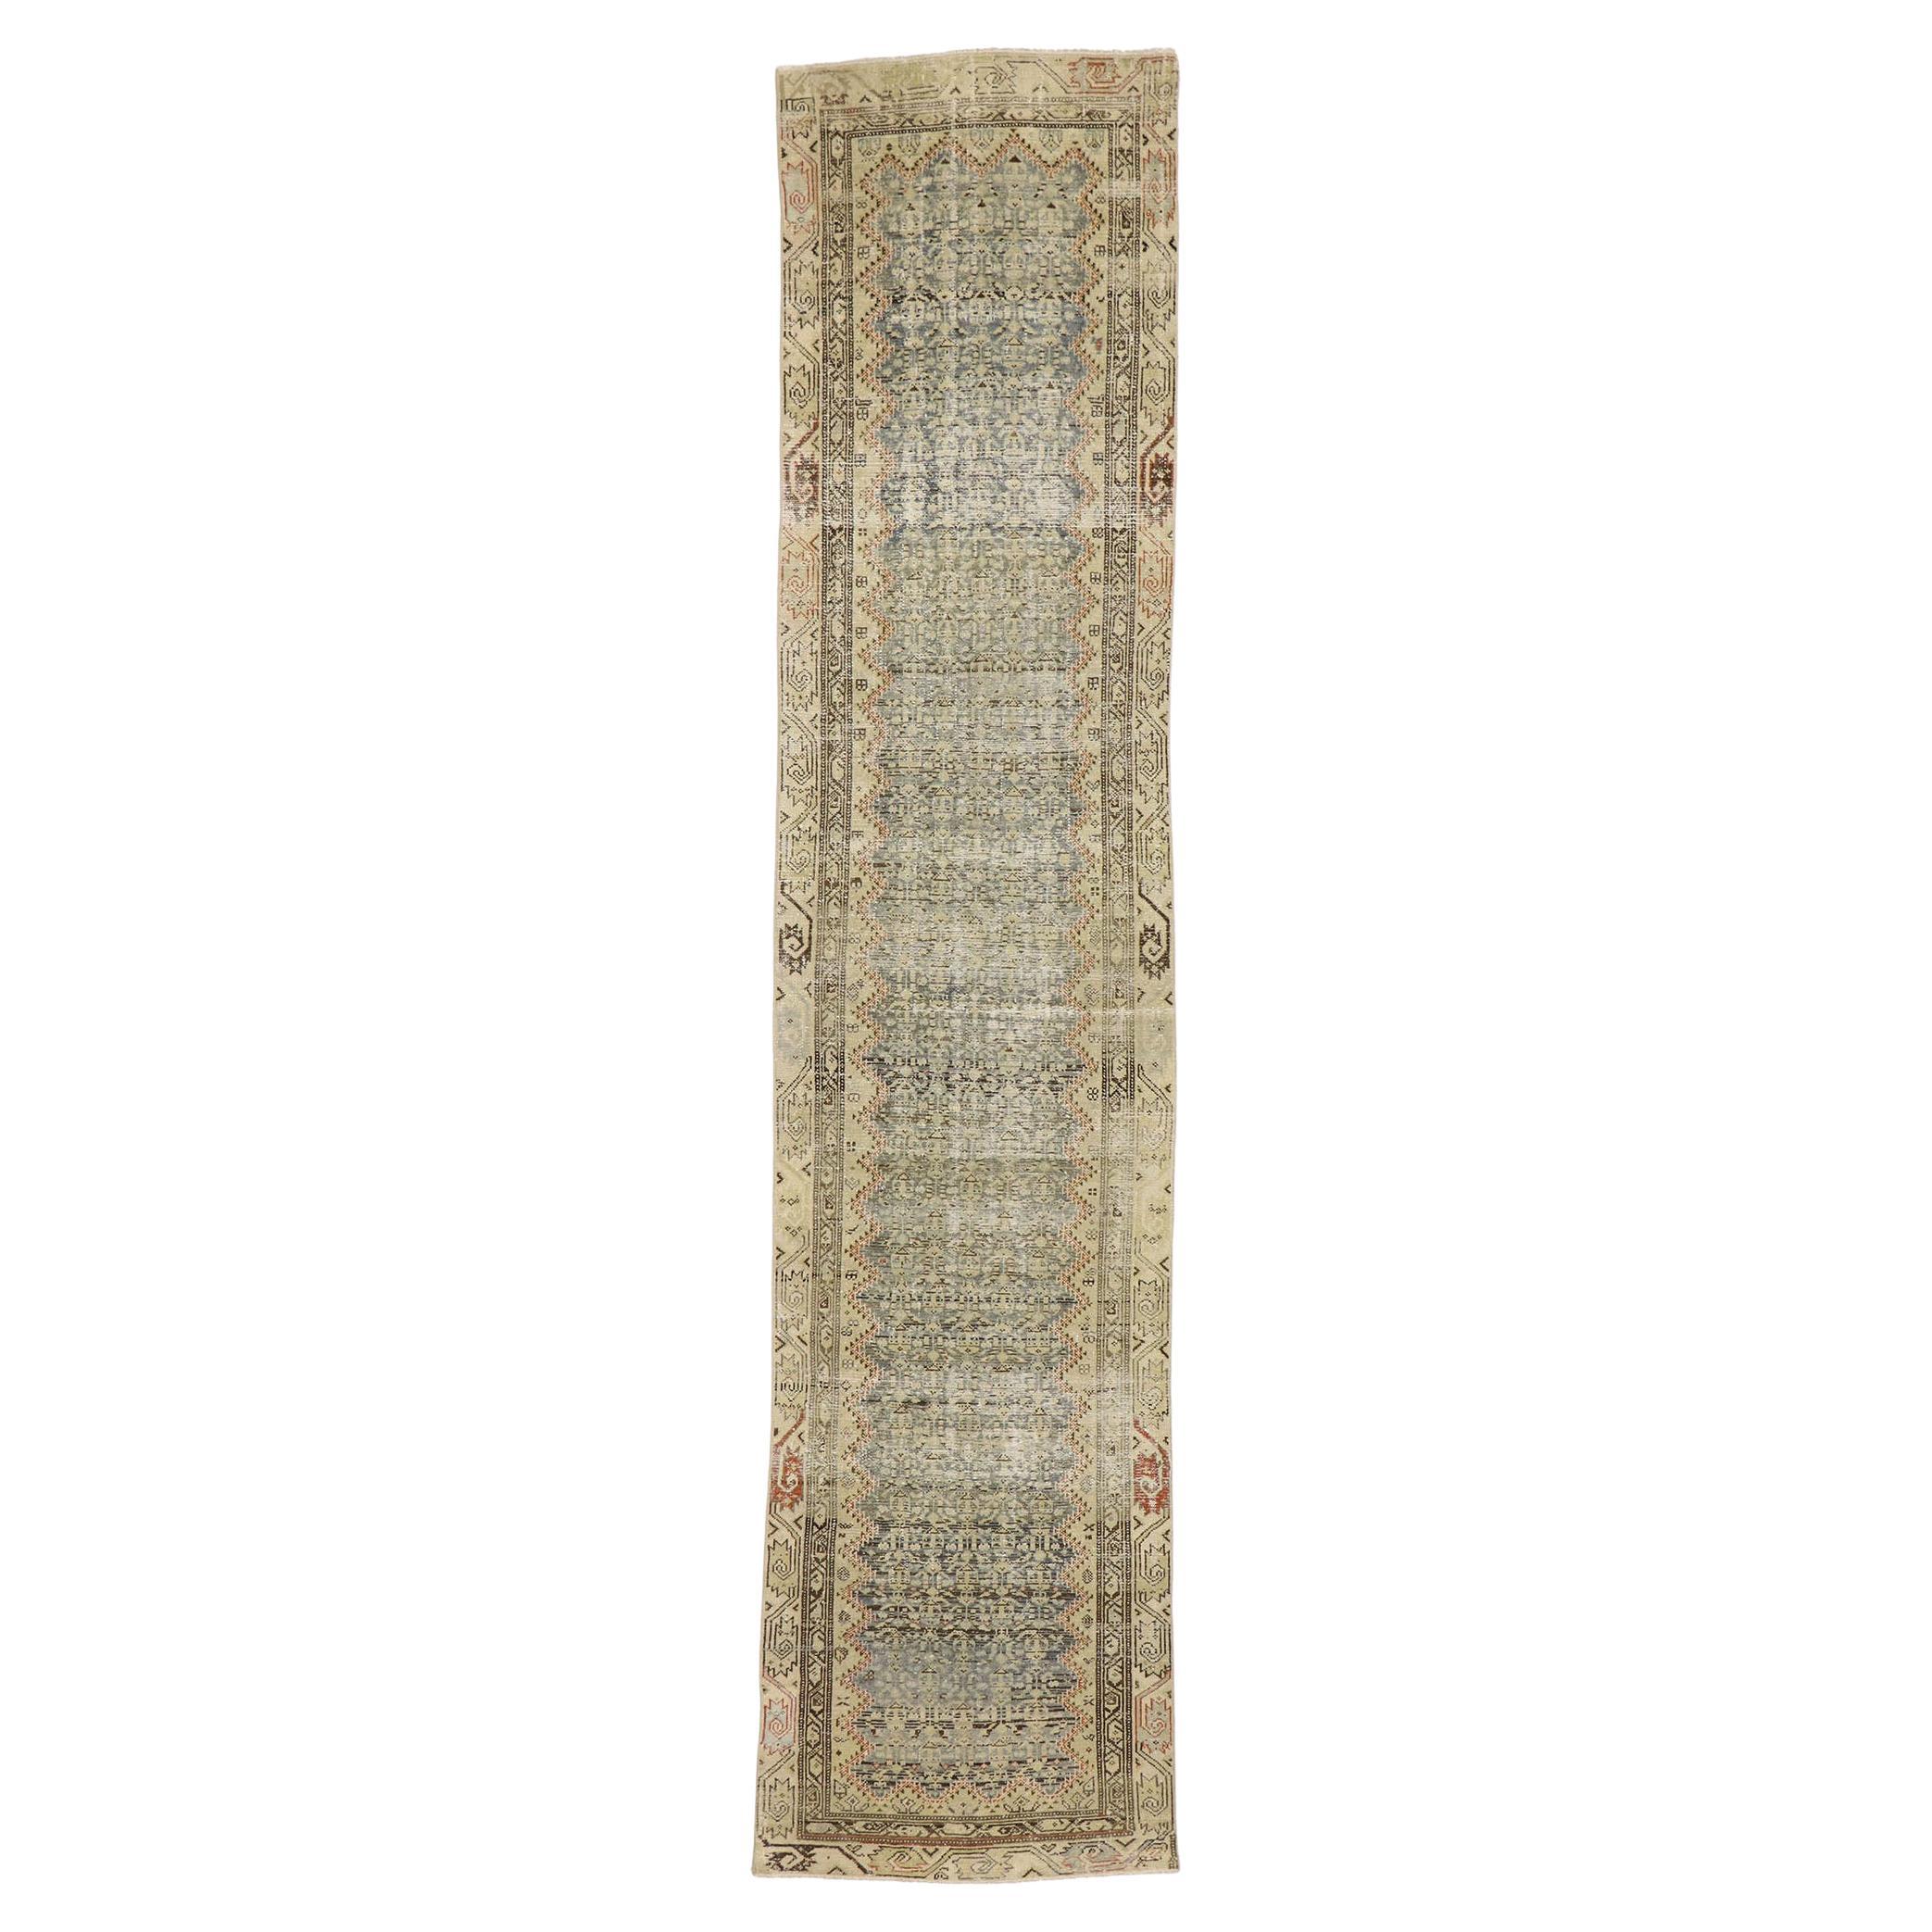 Antique Persian Sarab Rug Runner, Laid-Back Luxury Meets Faded Glamour